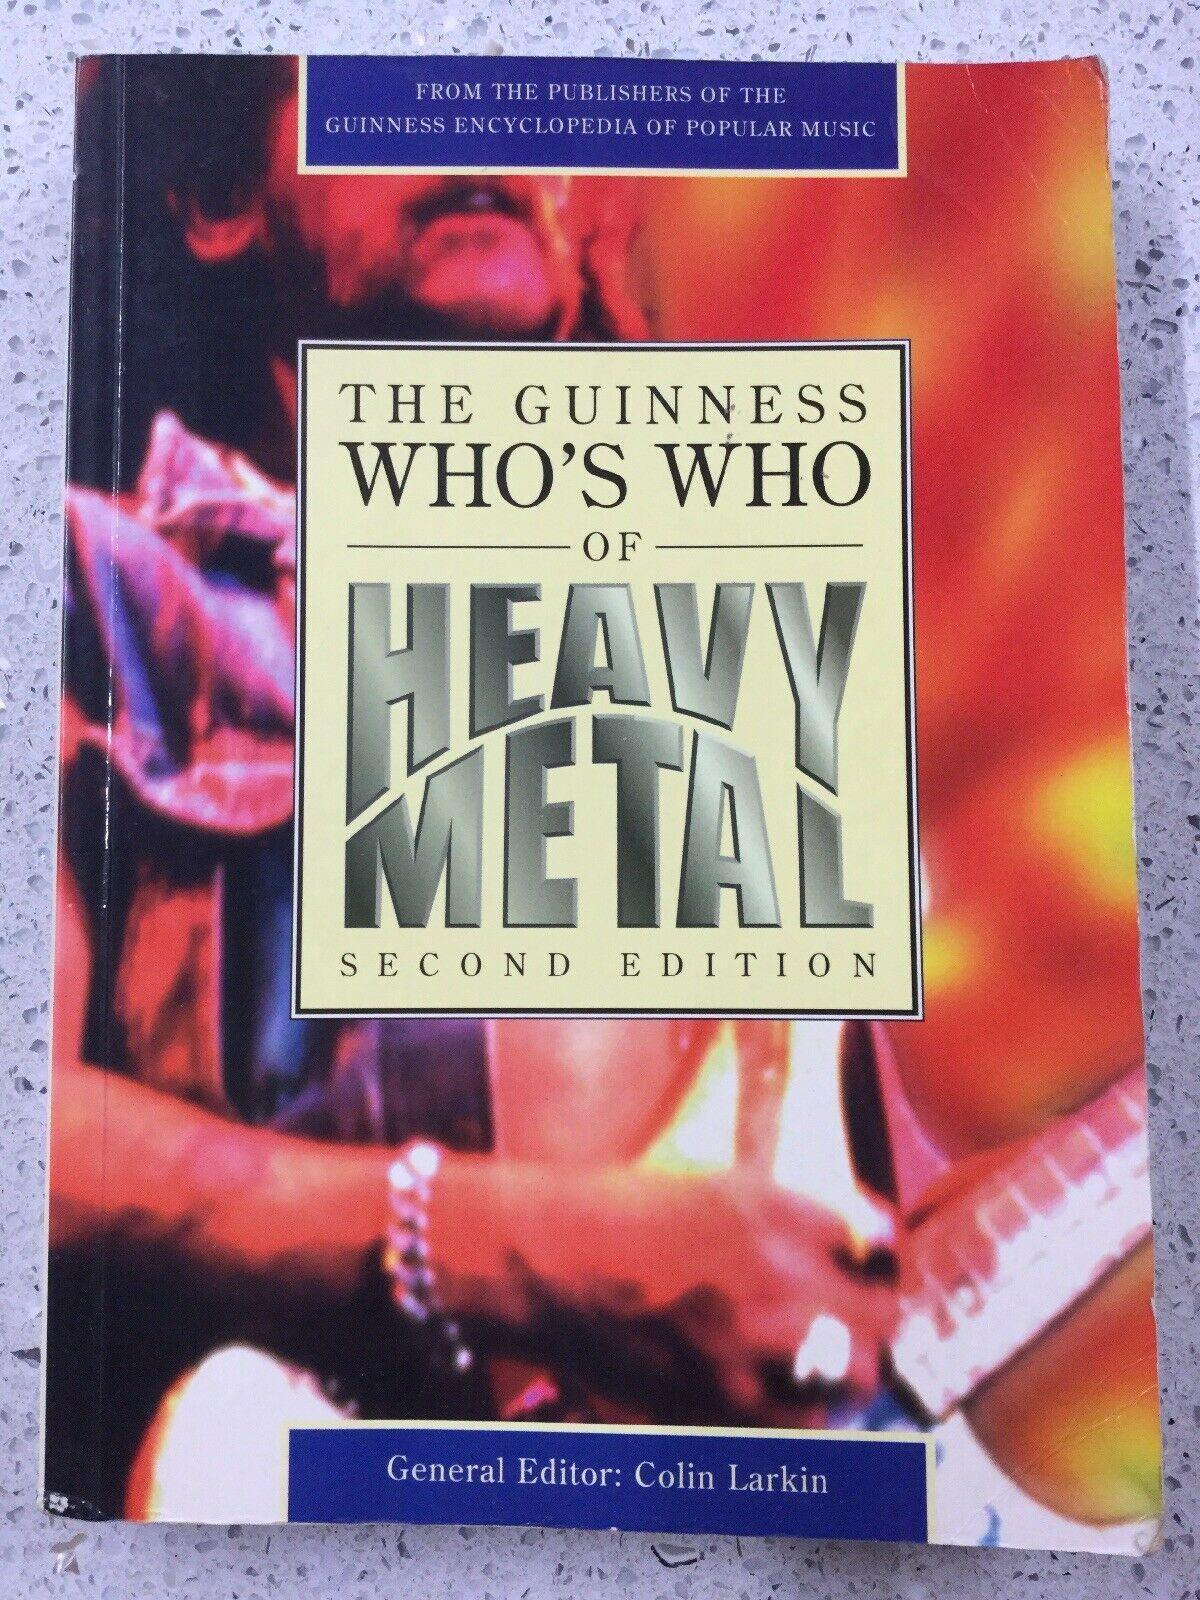 The Guinness who's who of heavy metal by Colin Larkin (Paperback)